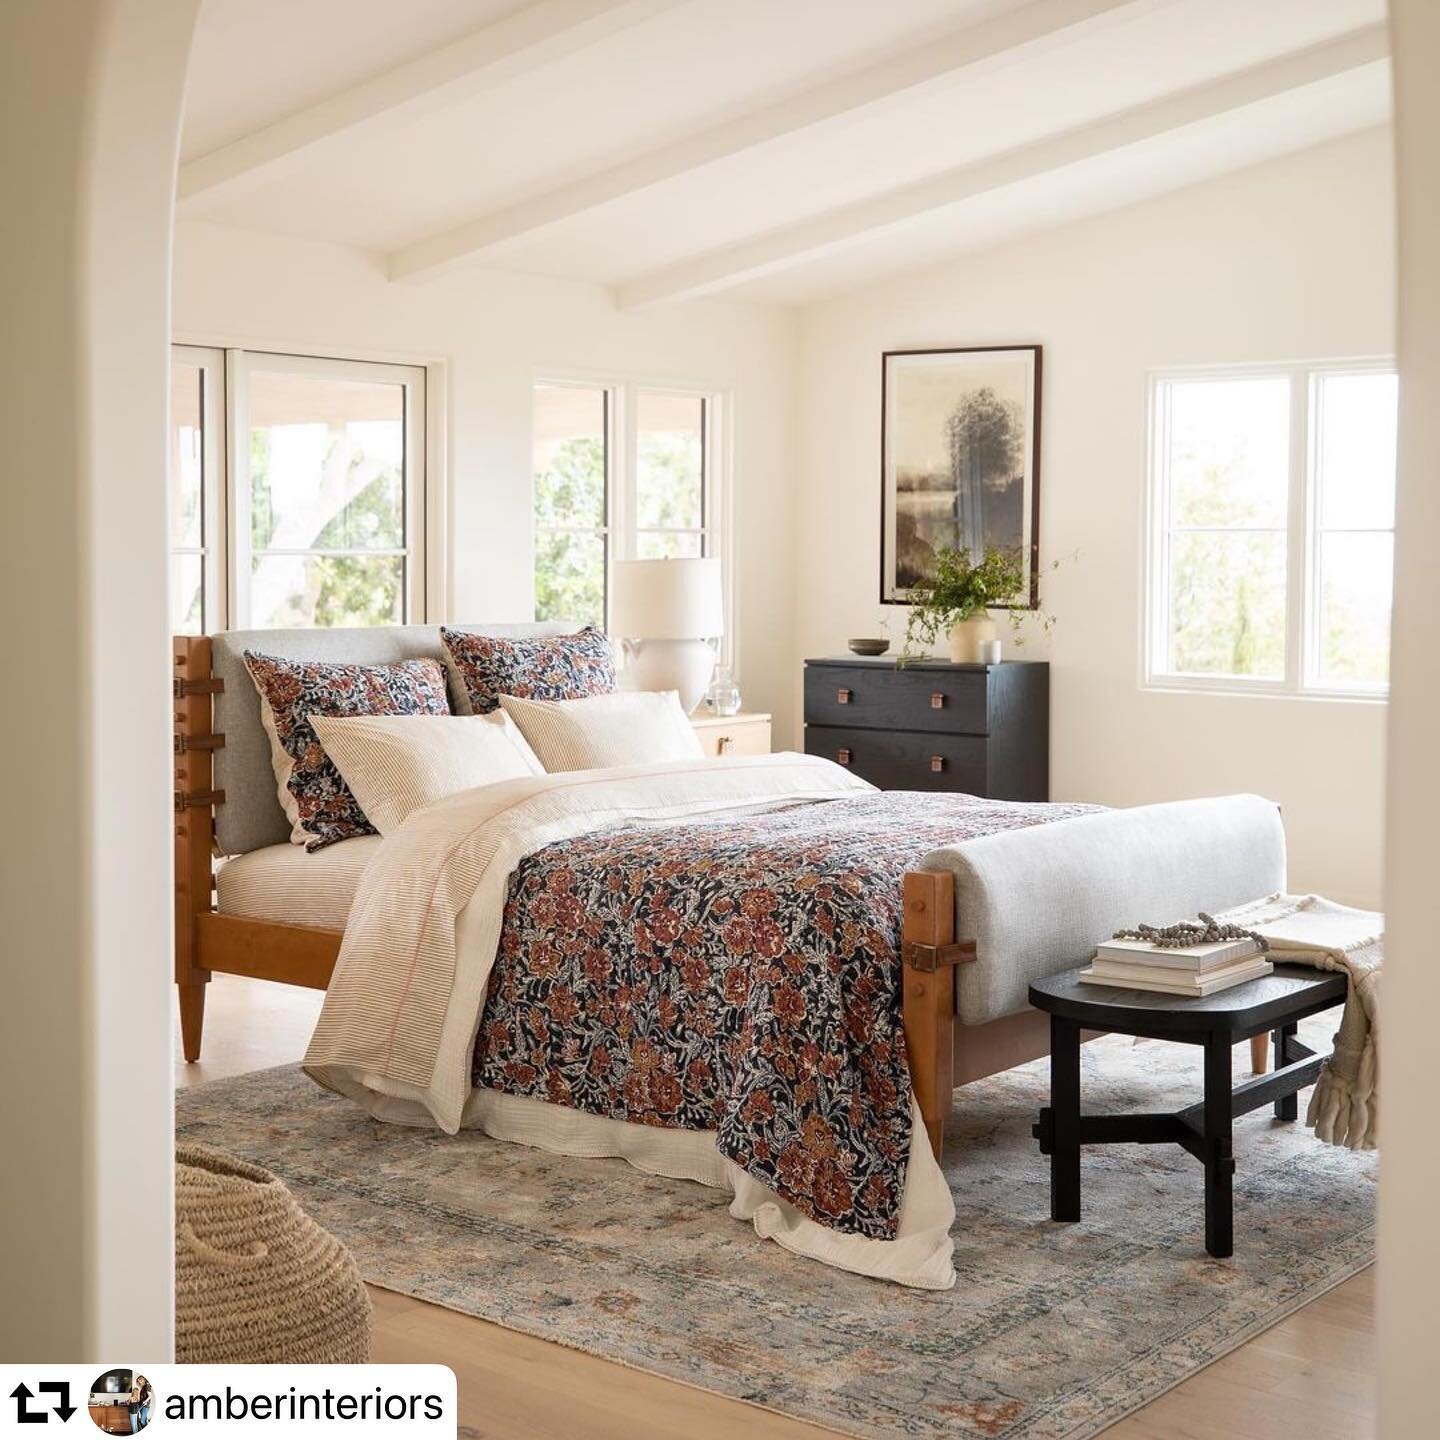 What is your favorite @amberinteriors piece in the new @anthroliving collection?! 

#repost @amberinteriors
・・・
I can finally share one of big my secrets with you all&hellip; My latest collection with @anthropologie and @anthroliving is HERE!! This n